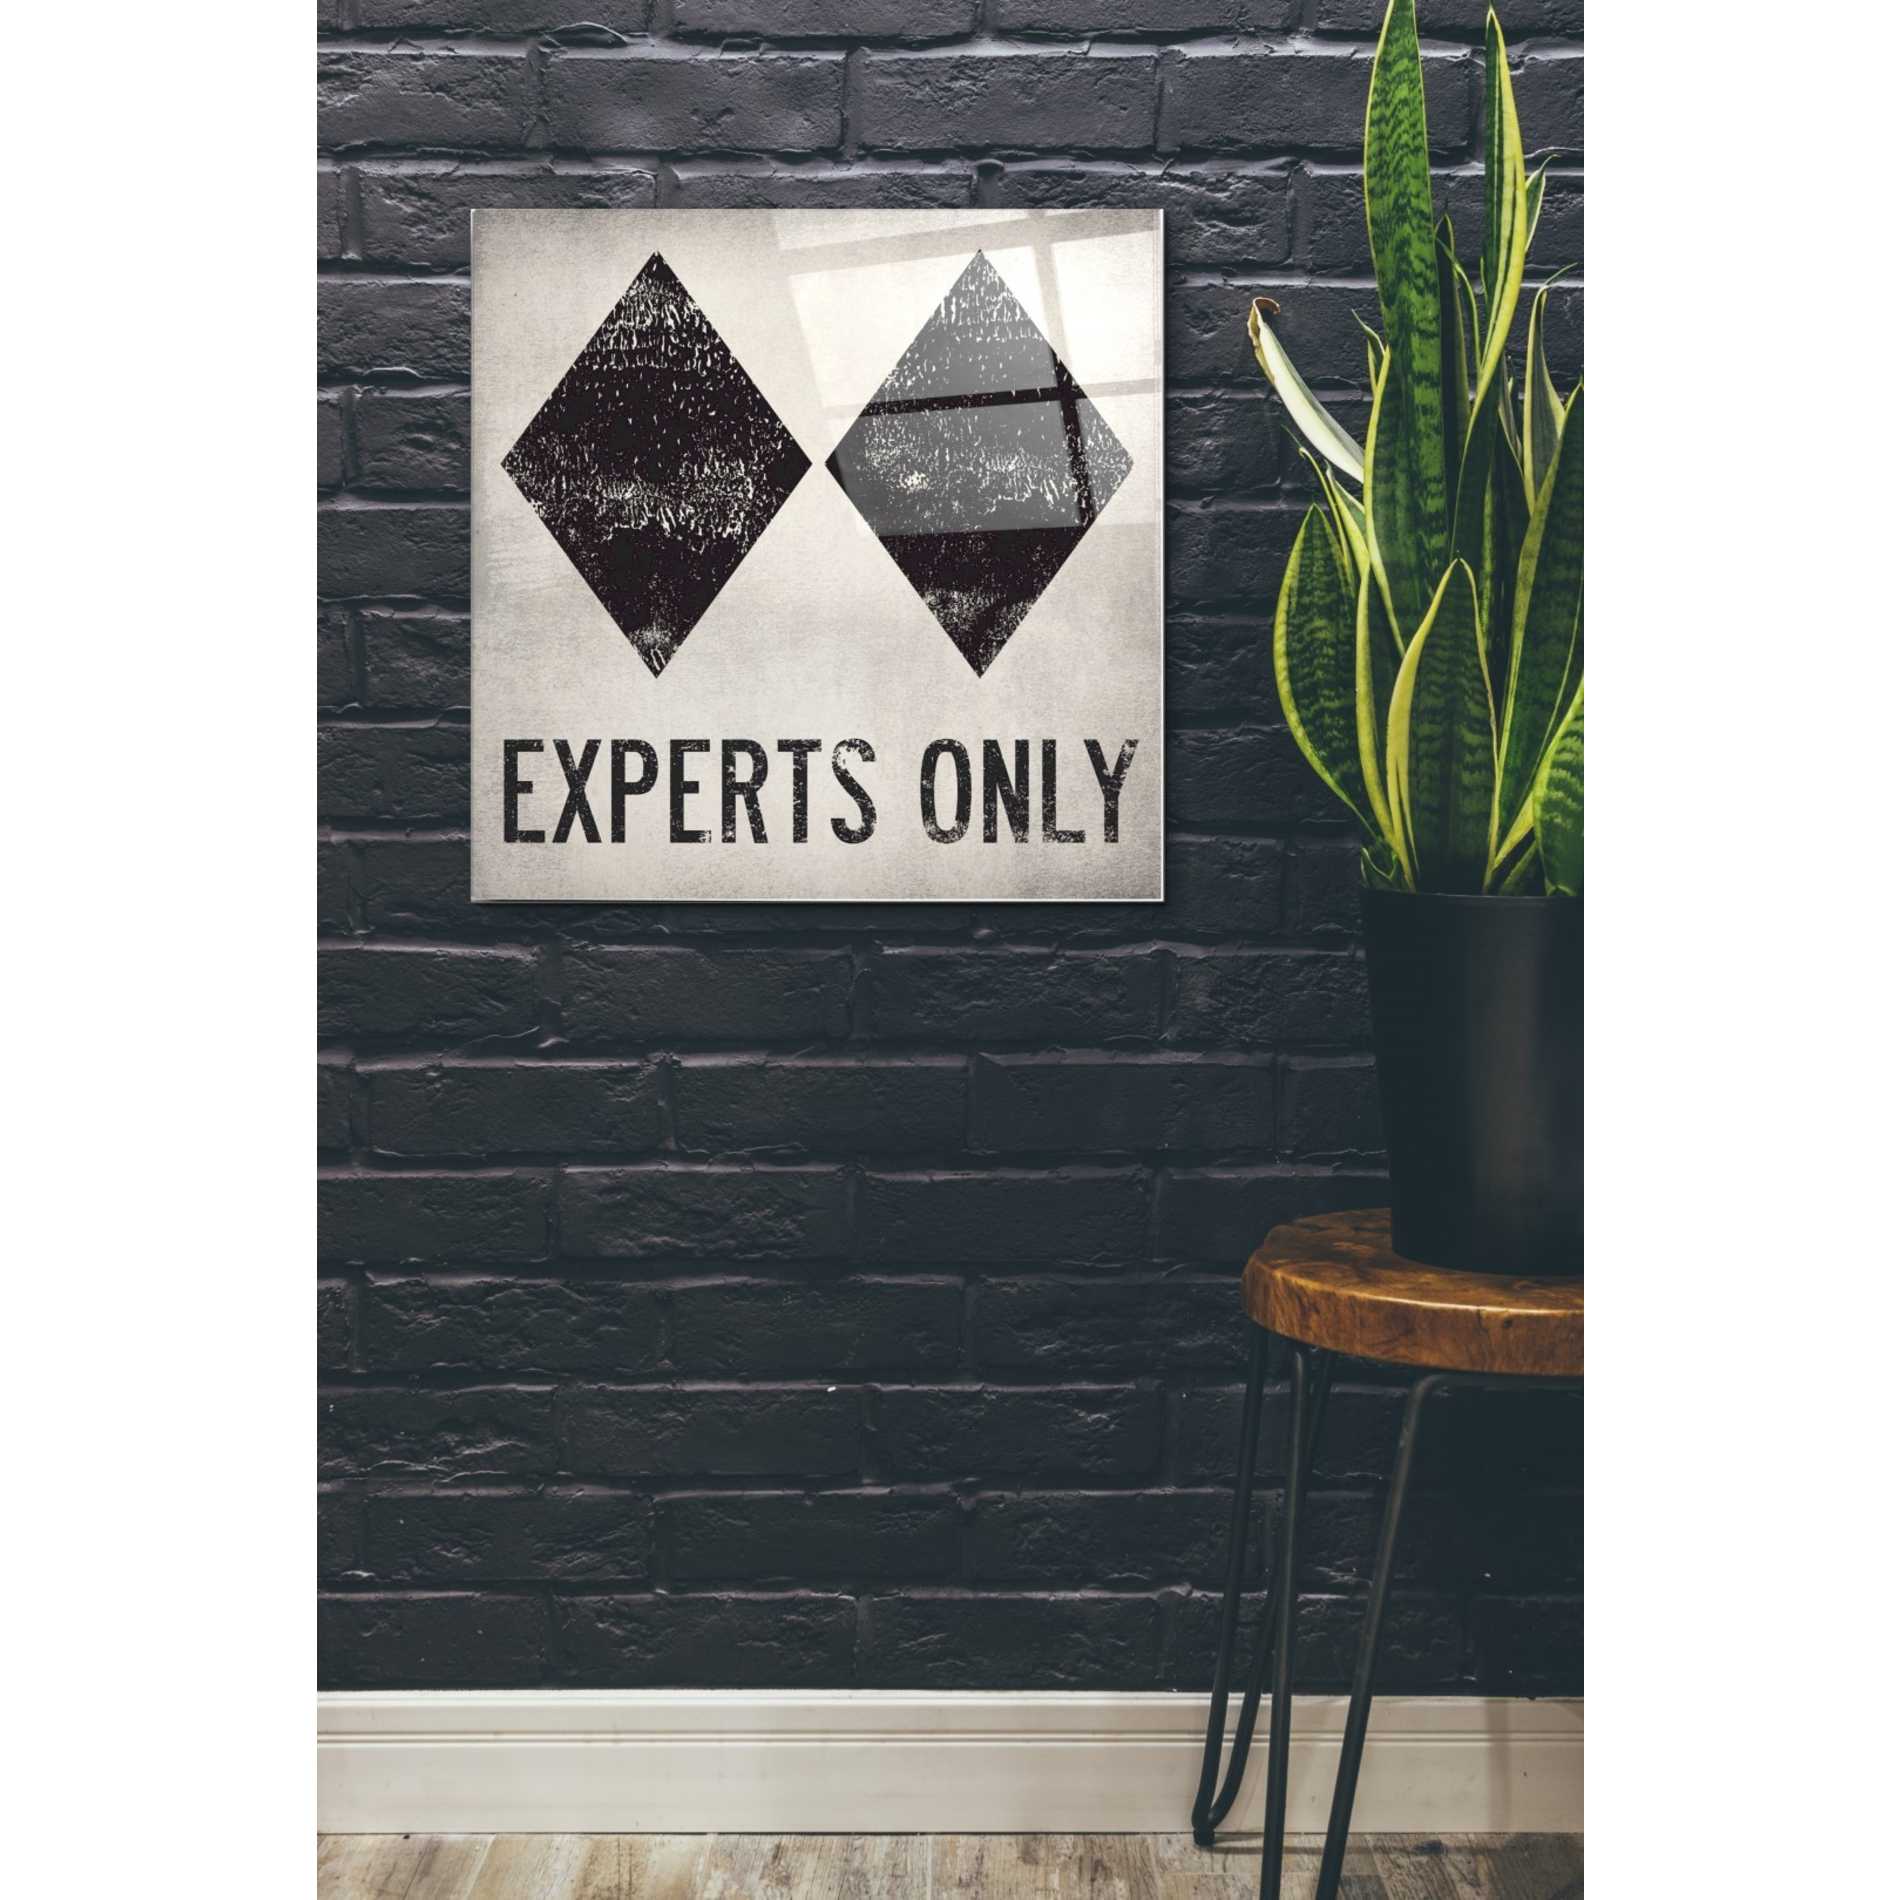 Epic Art 'Experts Only White' by Ryan Fowler, Acrylic Glass Wall Art,24x24